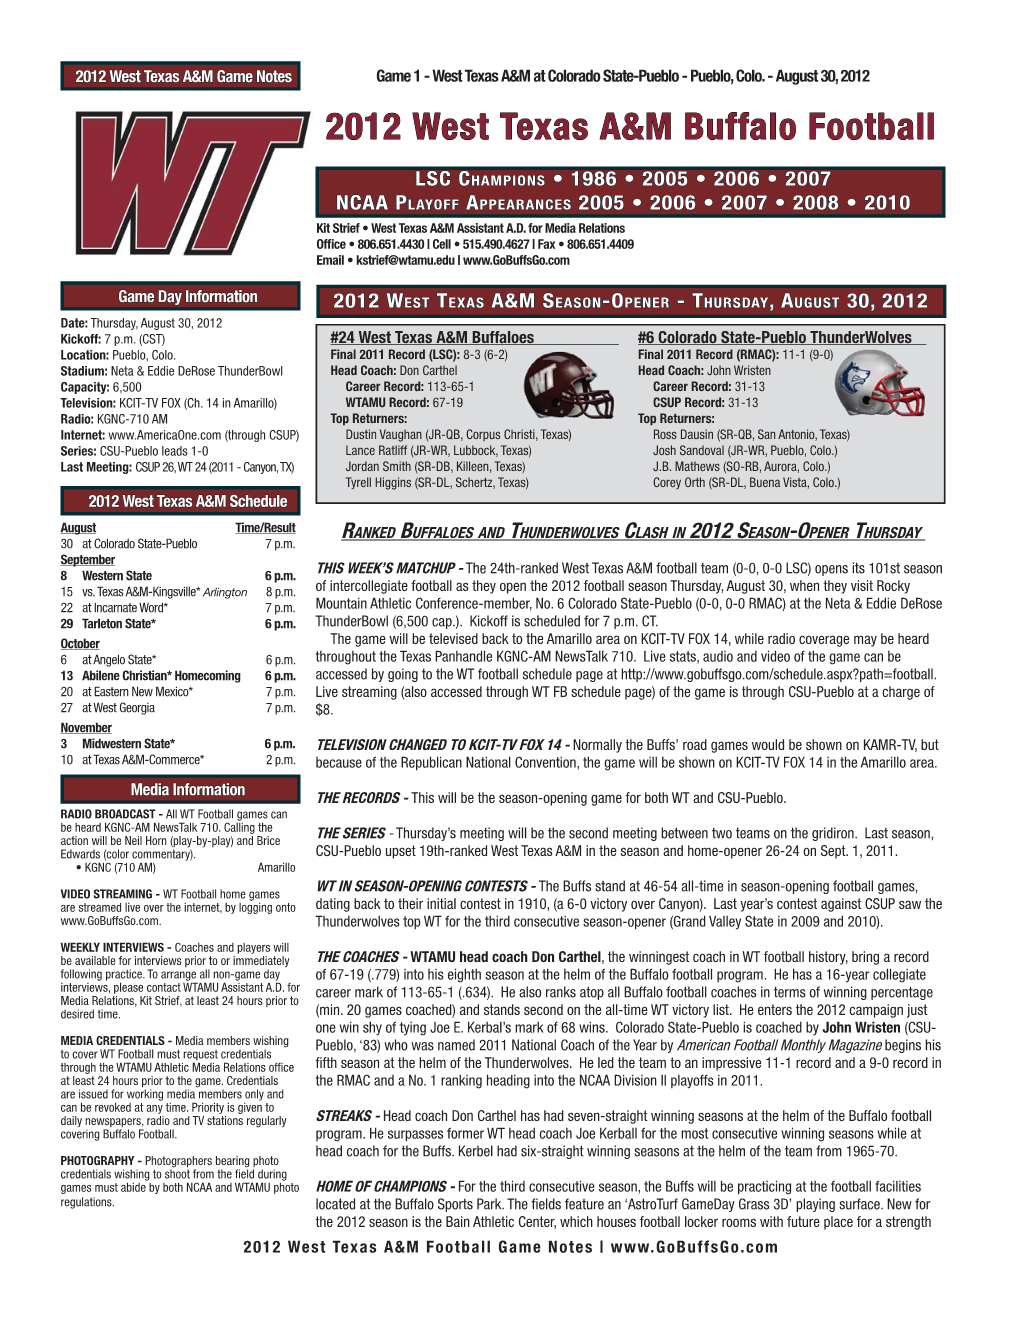 FB Game Notes 8-30.Indd